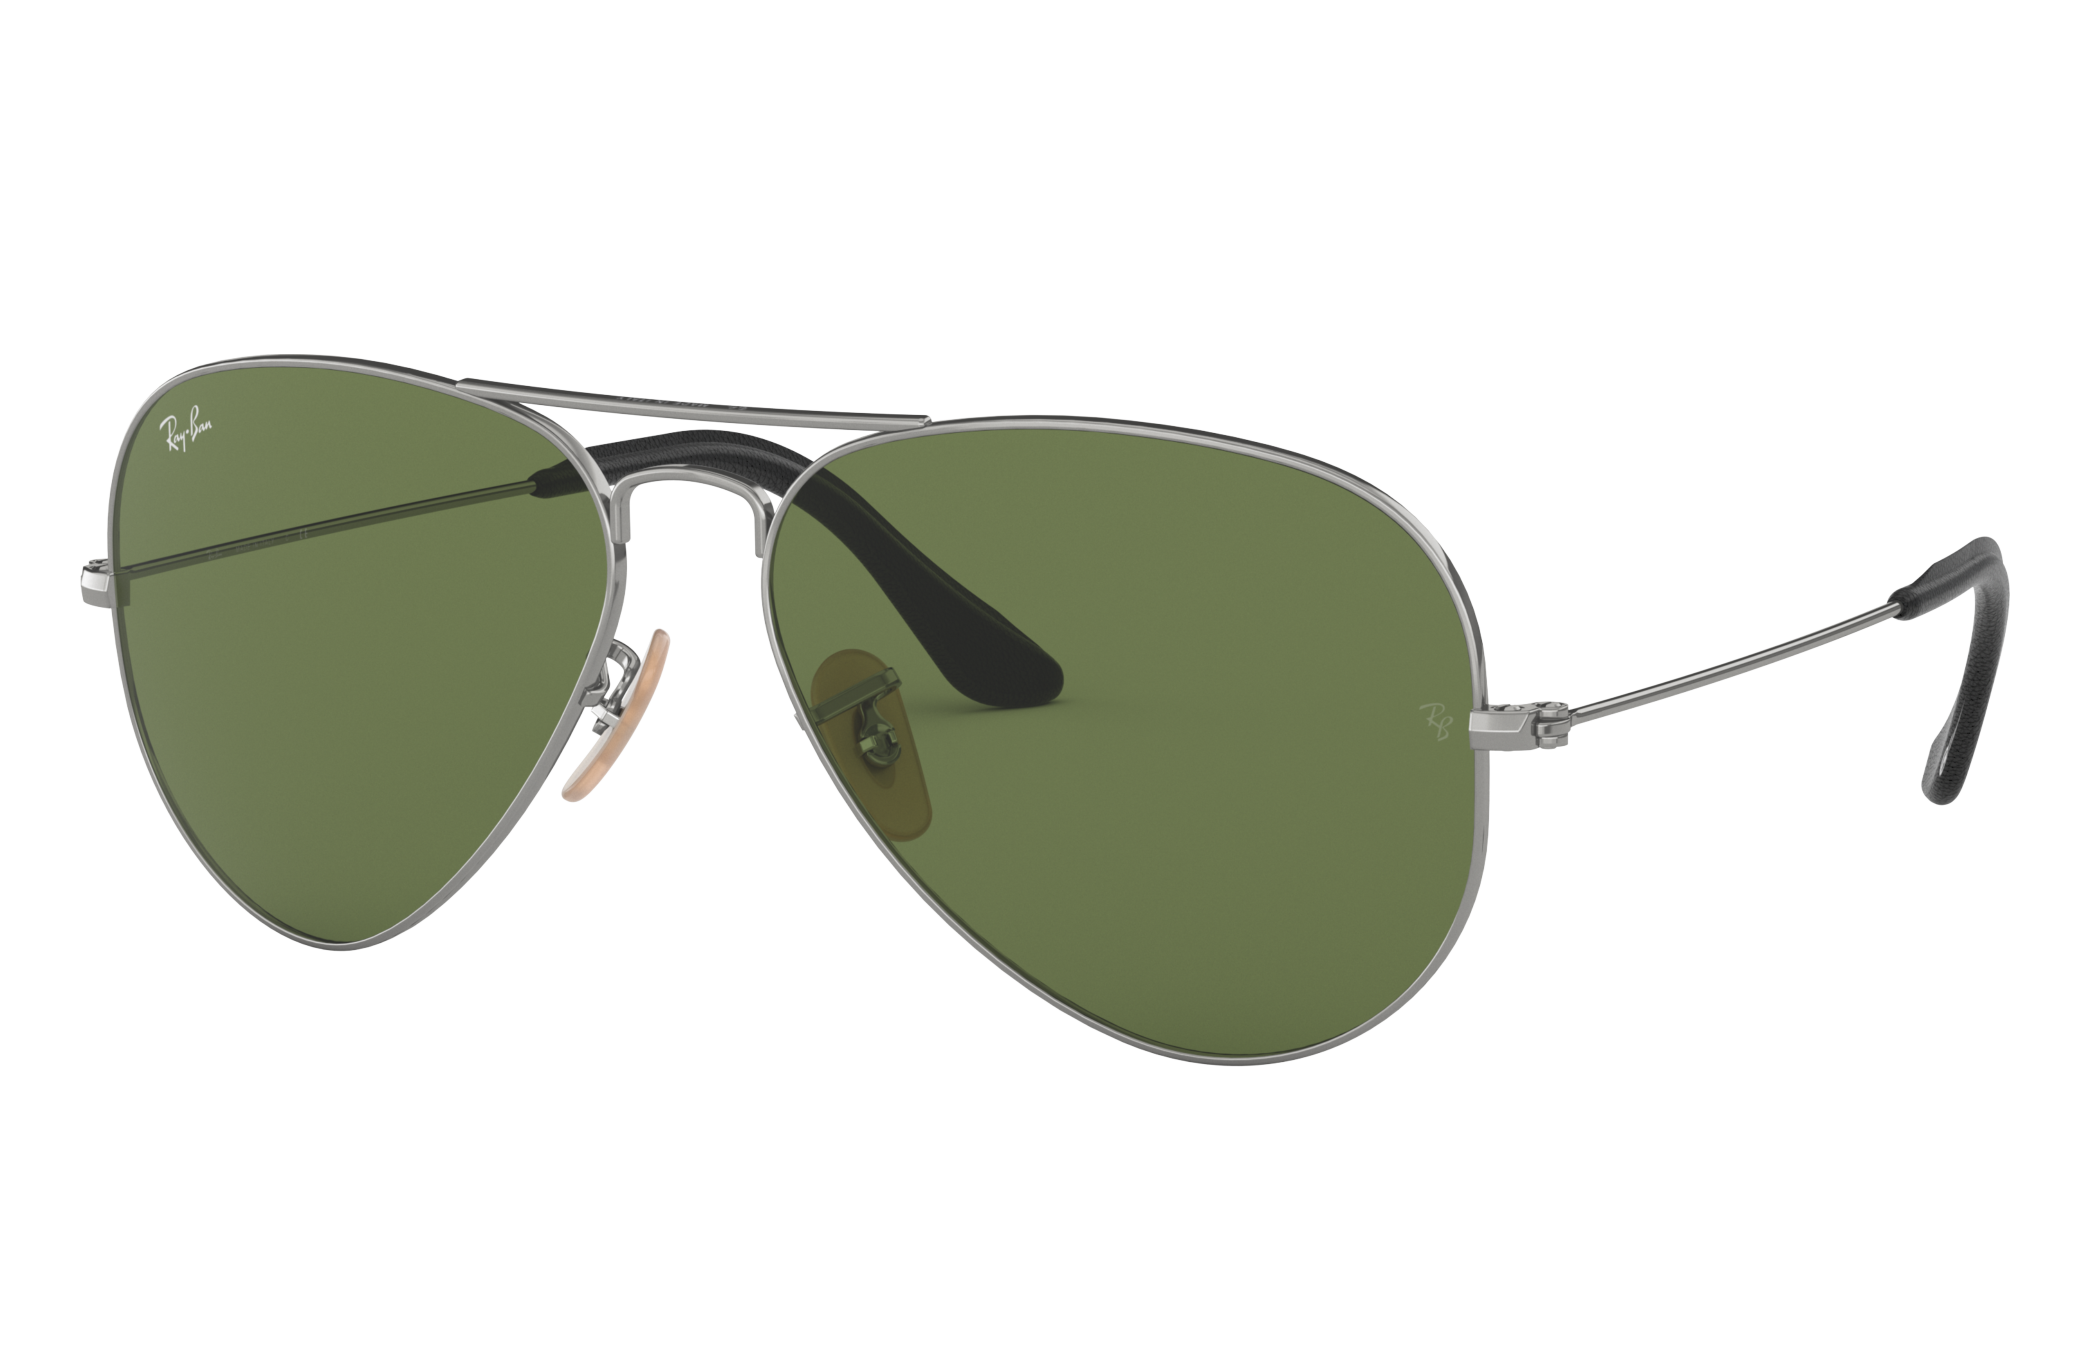 Aviator @collection Sunglasses in Gunmetal and Green - RB3025 | Ray-Ban® US